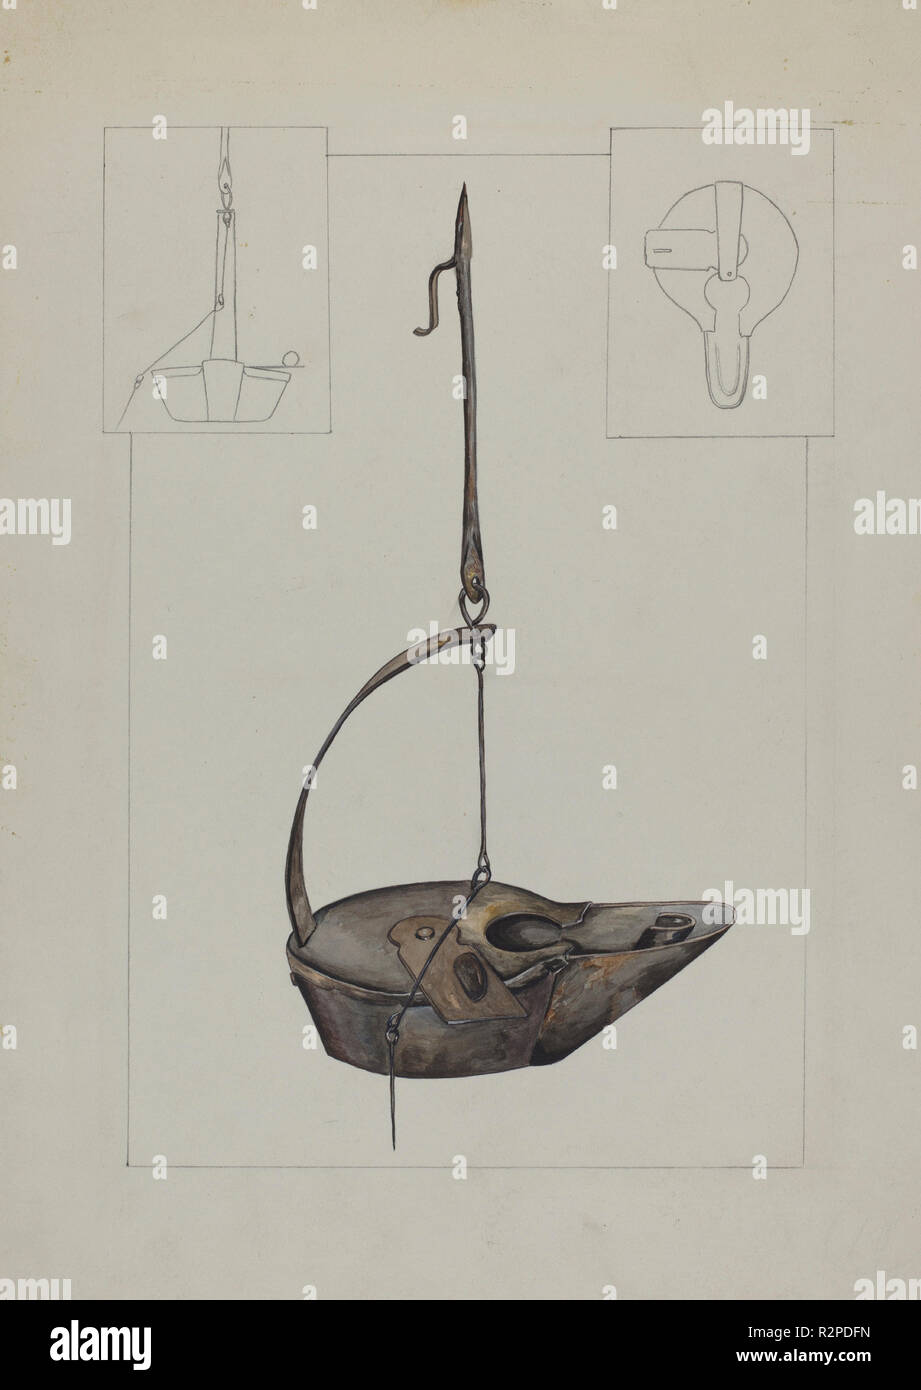 Betty Lamp. Dated: c. 1937. Dimensions: overall: 30.7 x 22.8 cm (12 1/16 x 9 in.)  Original IAD Object: 7 7/8' high, 4: long; 2 1/2' wide. Medium: watercolor, graphite, and pen and ink on paper. Museum: National Gallery of Art, Washington DC. Author: Gilbert Boese. Stock Photo